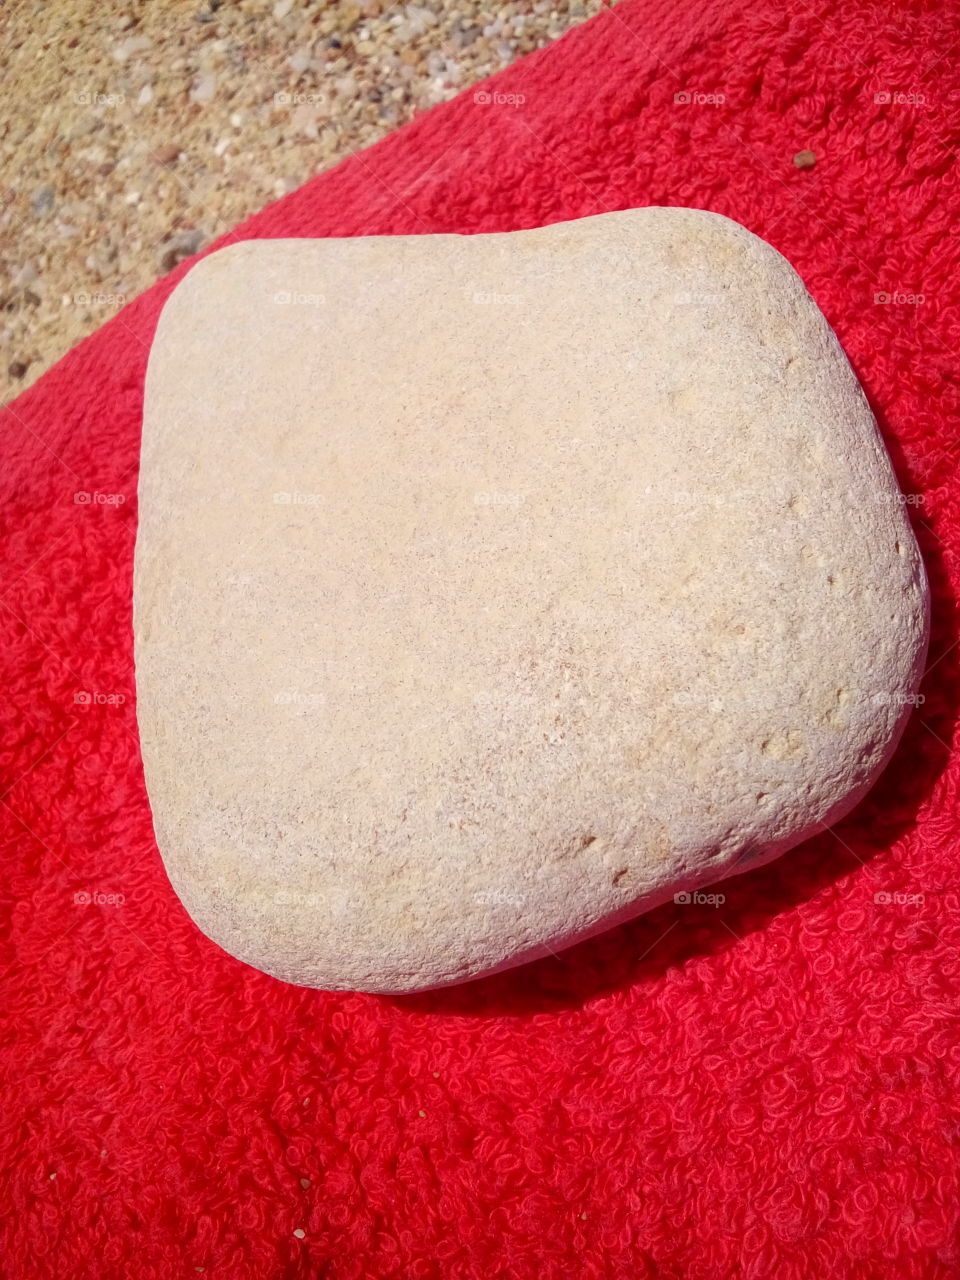 White Stone on Red Beach Towel